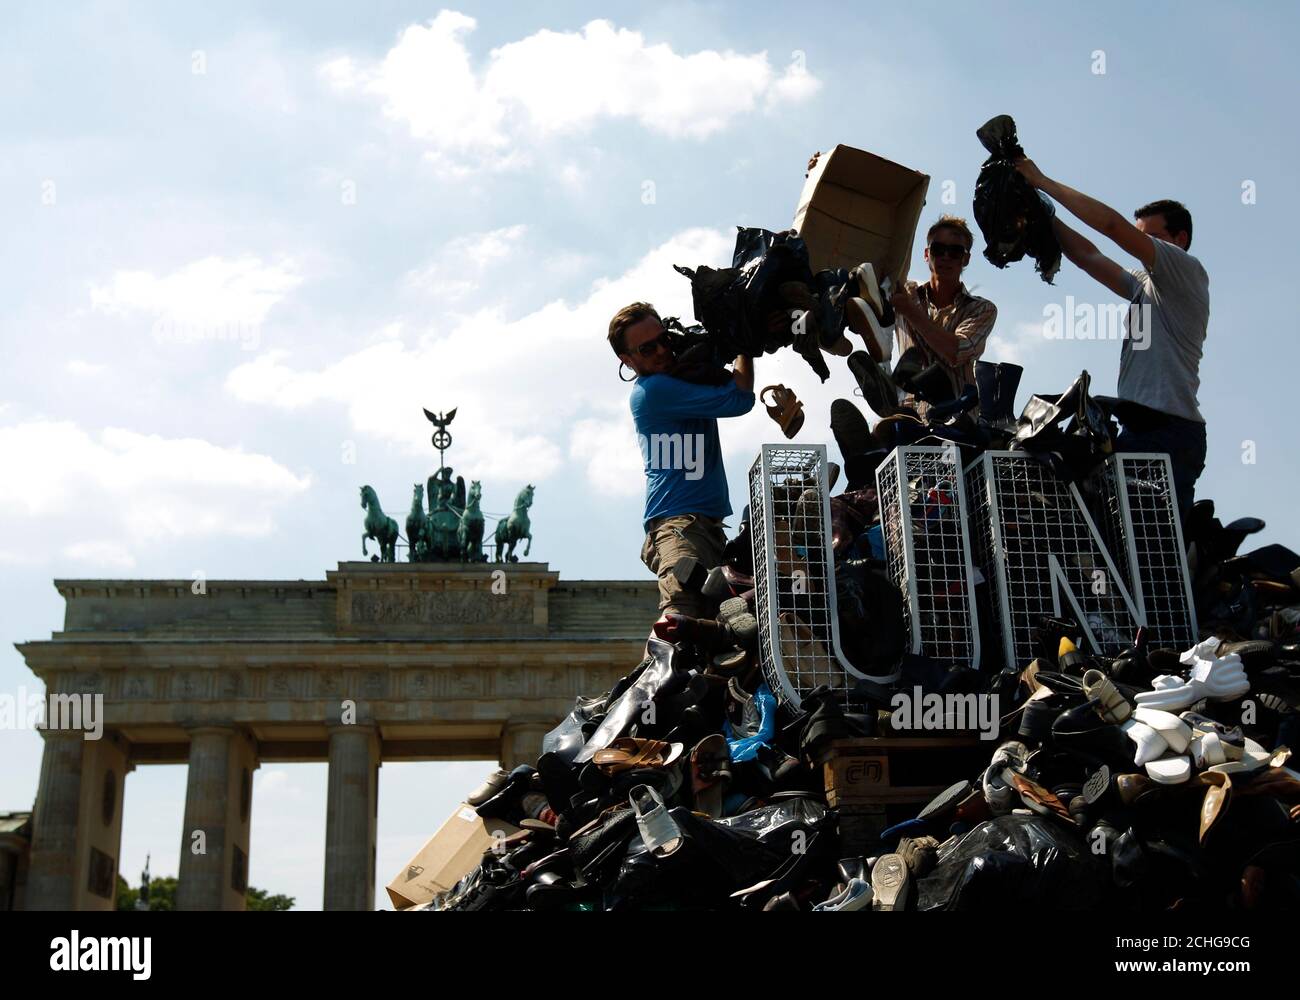 People pile up shoes to build the monument 'Pillar of Shame' in front of the Brandenburg Gate in Berlin, July 10, 2010, commemorating the 1995 mass murder of Muslim men and boys in the town of Srebrenica. The Society for Threatened Peoples has collected some16,744 shoes from Bosnia, Austria, Switzerland and Germany to build the monument is to draw attention to the failure of the United Nation (UN) to prevent the killing of 8372 refugees who died during the Bosnian War in an area that was declared a UN safe zone.  REUTERS/Thomas Peter (GERMANY - Tags: POLITICS) Stock Photo